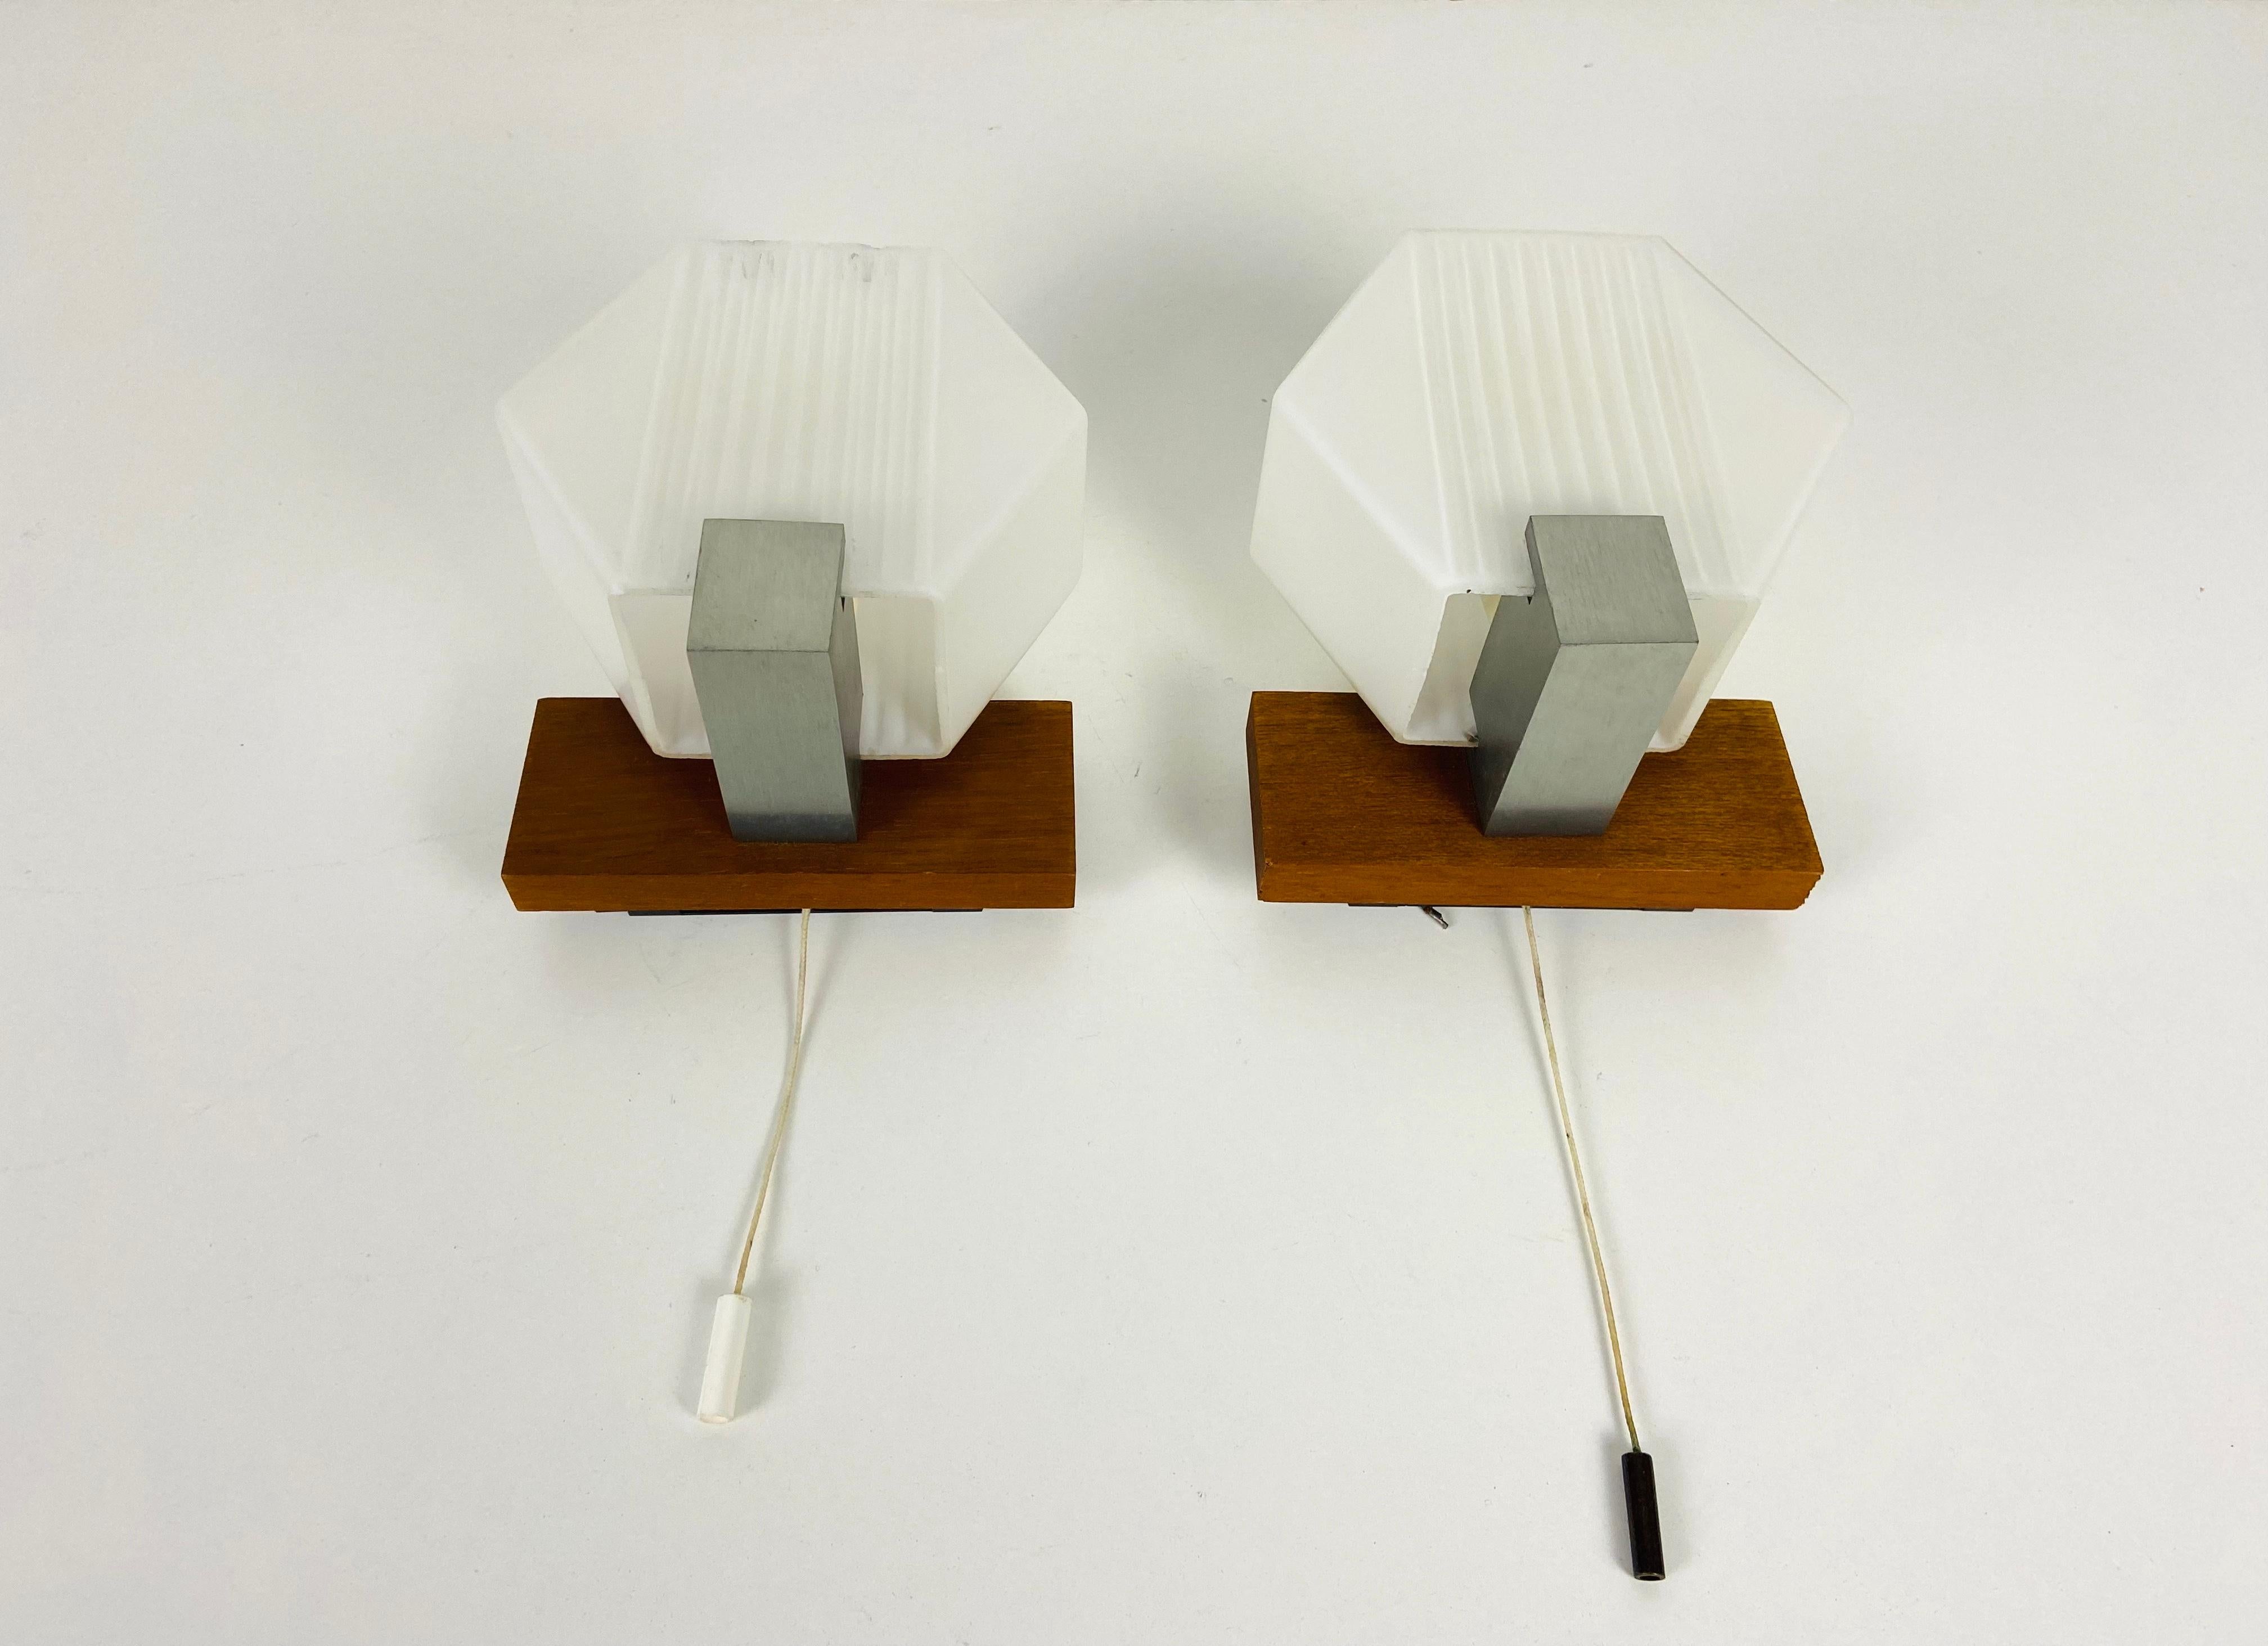 Pair of wall lamps made in Germany in the 1970s. It is fascinating with its glass ornaments. Textured opaline glass with teak body. 

The lights require one E14 light bulb. Works with both 120/220V. Very good vintage condition. Free worldwide